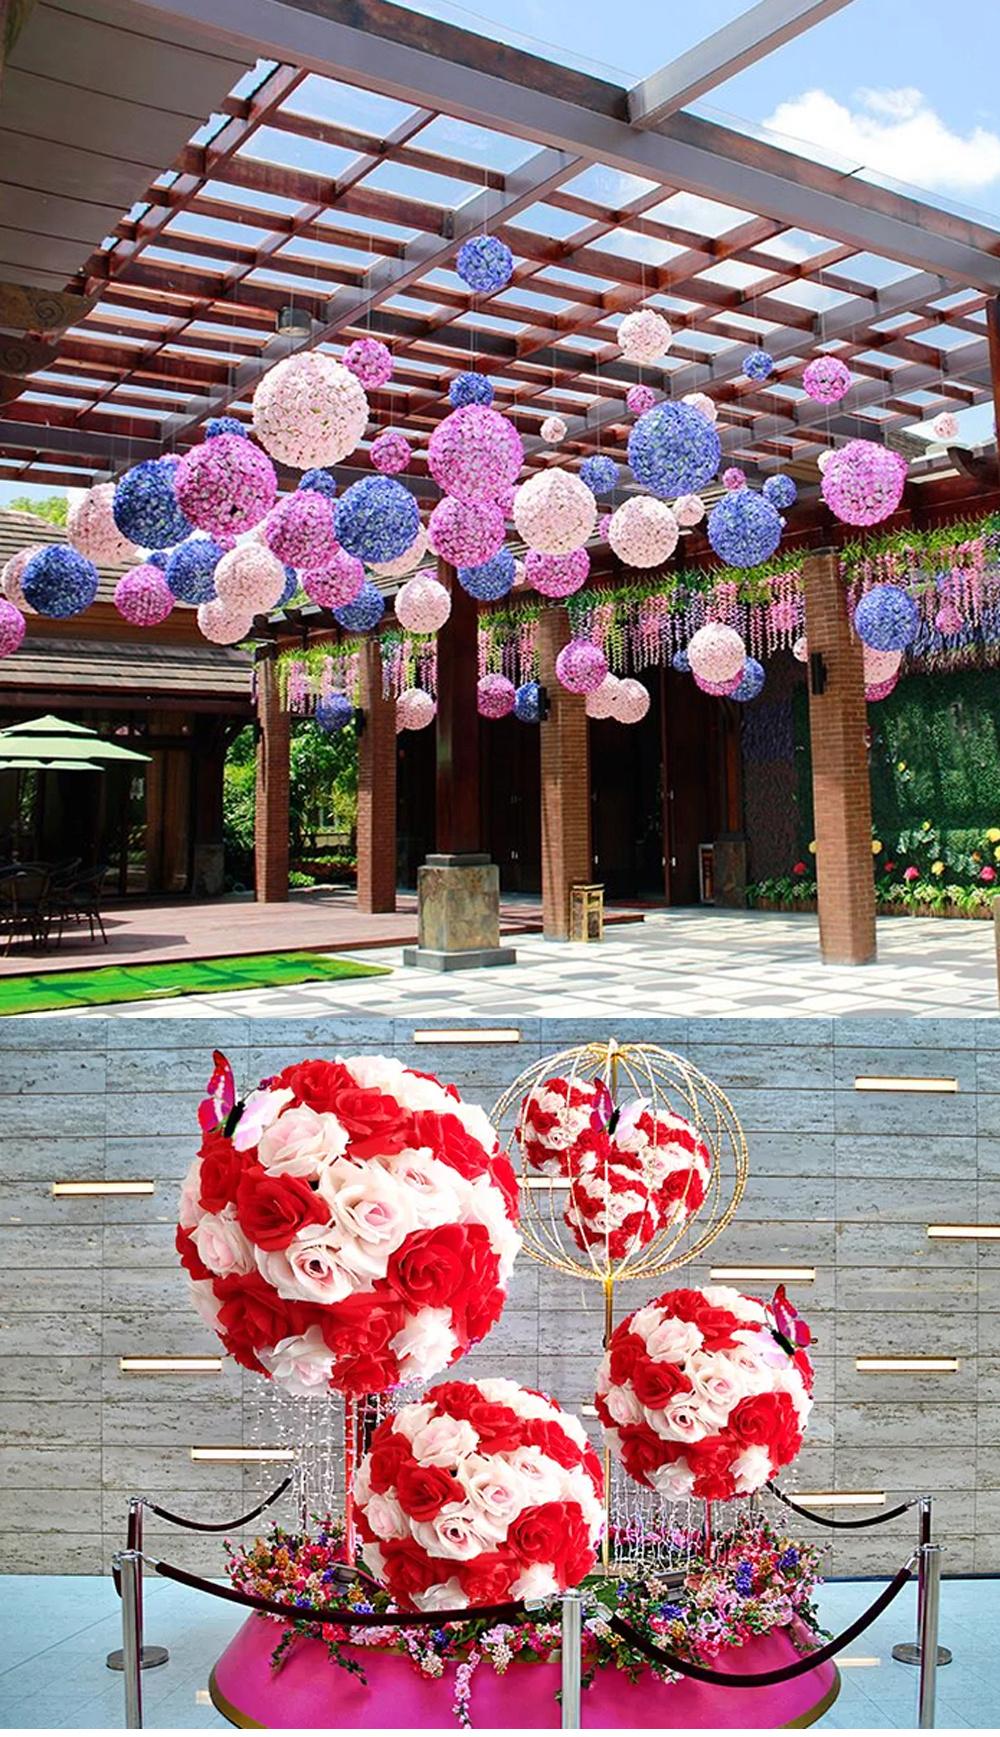 Artificial Hanging Decorative Flower Ball in Different Sizes